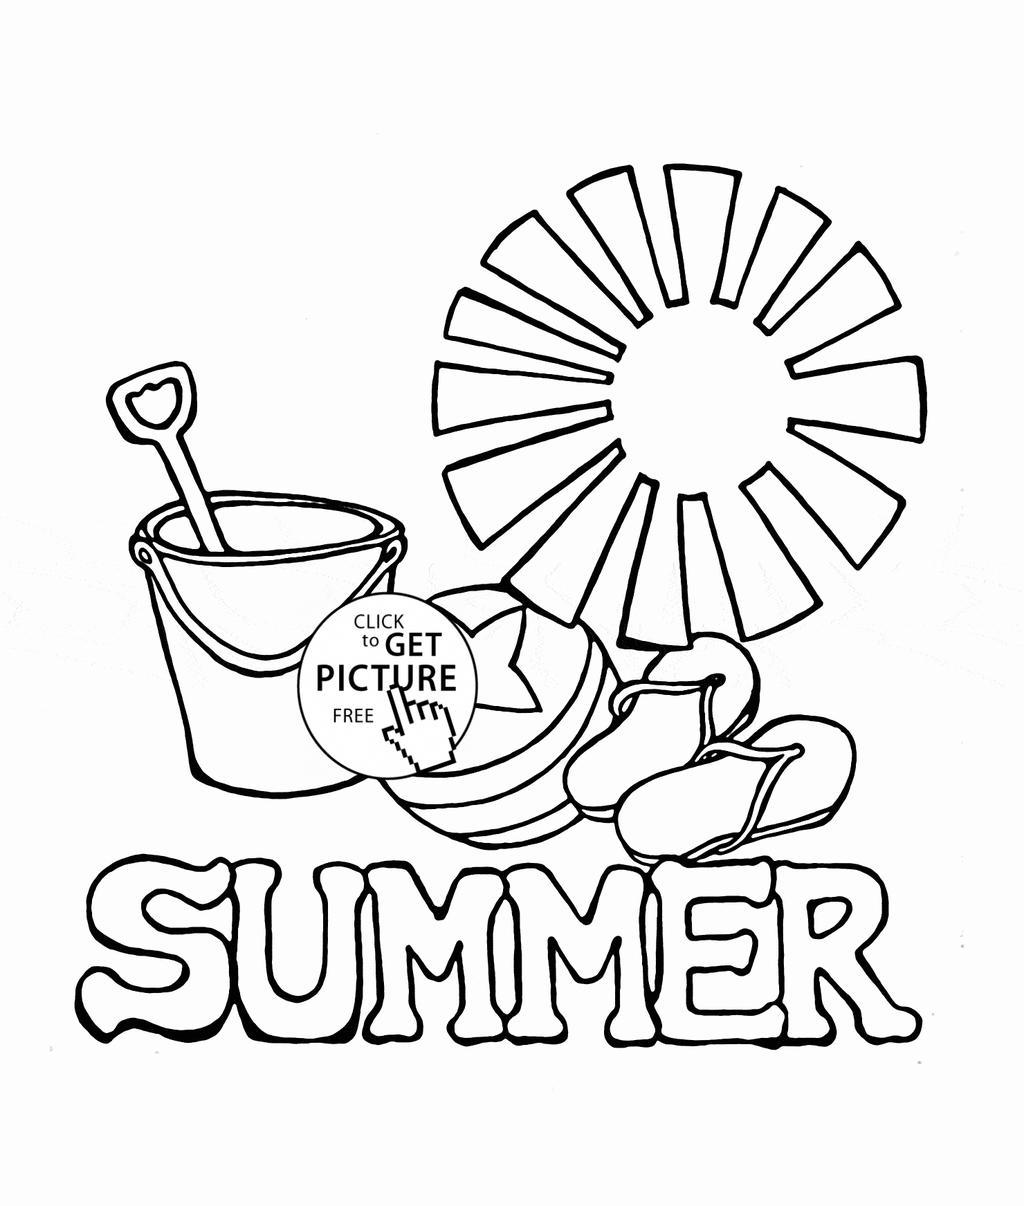 Summer Themed Coloring Pages For Kids - Allnaturecolor.us